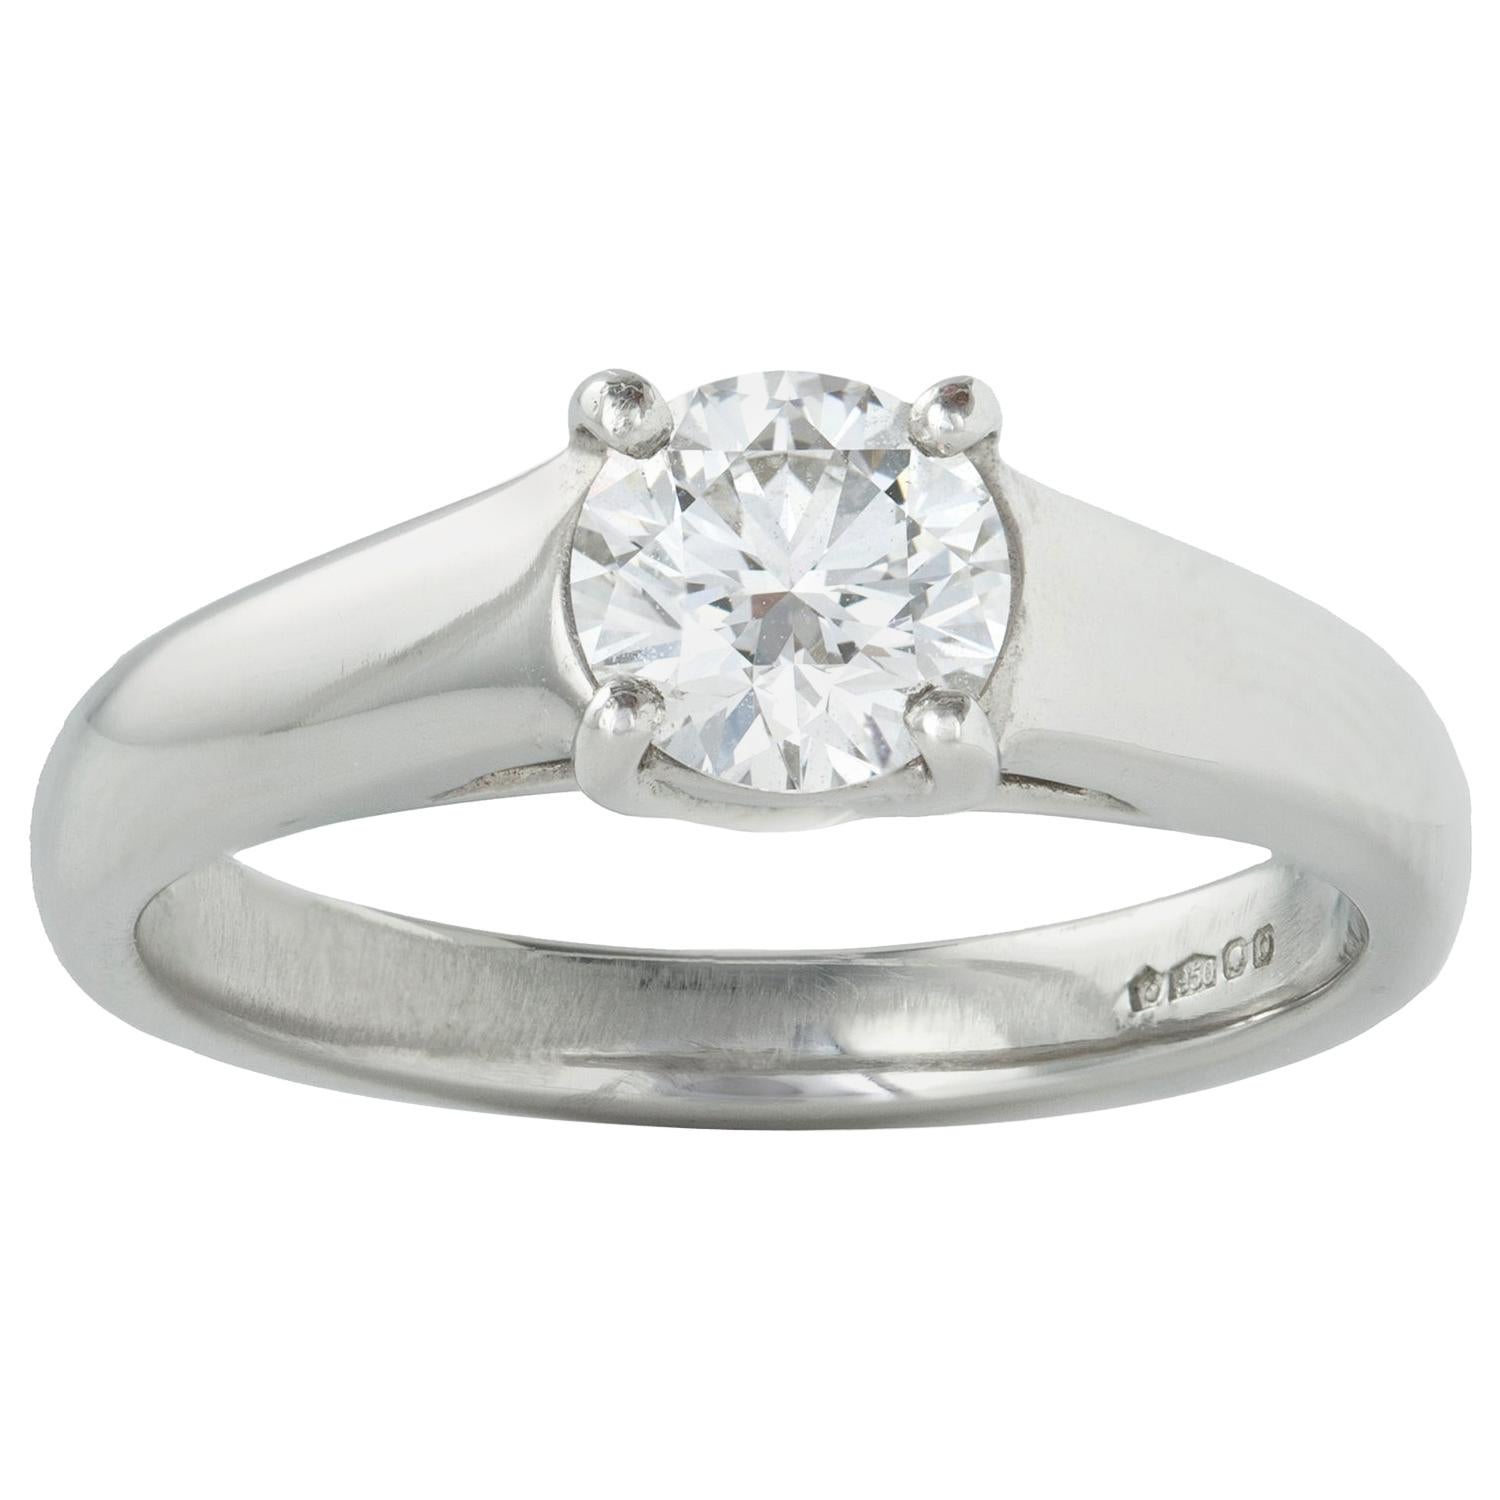 GIA Certified 0.74 Solitaire Diamond Ring